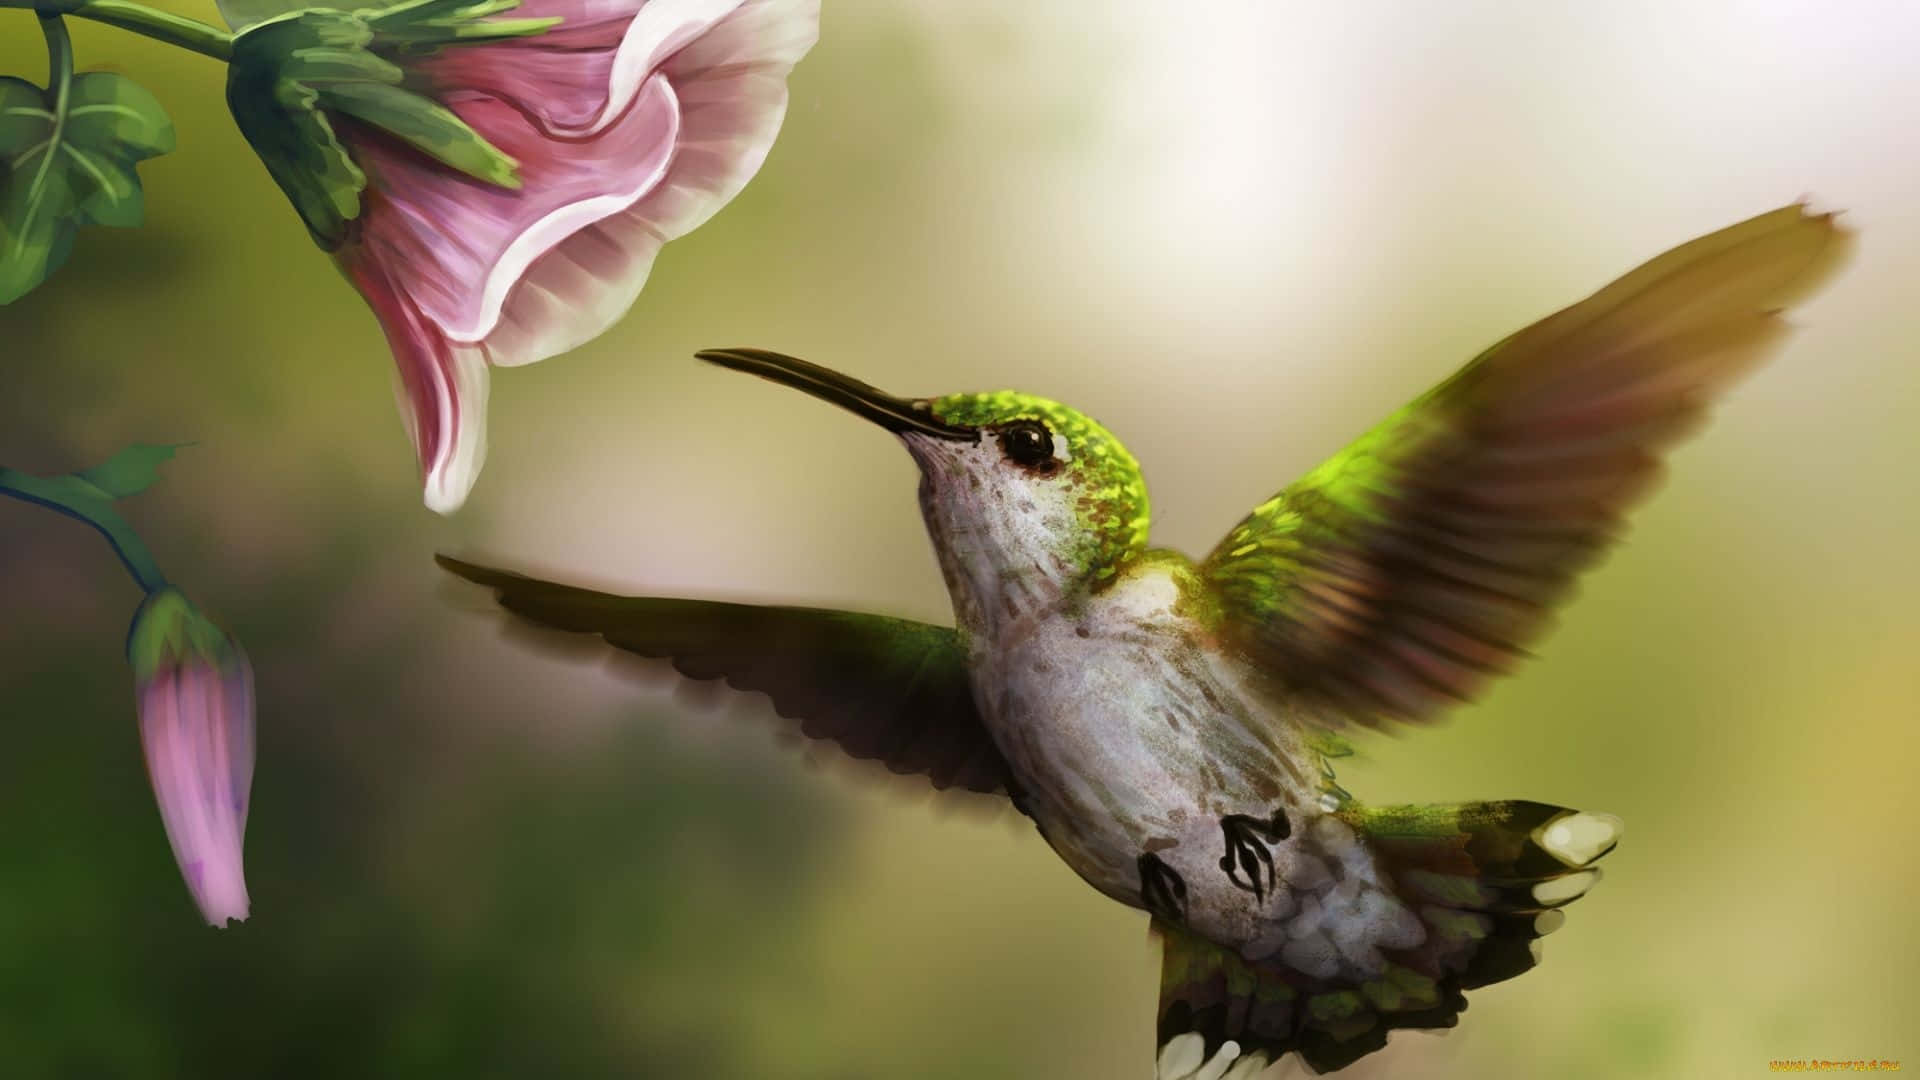 Get a closer look at nature’s beauty with this beautiful picture of a hummingbird.